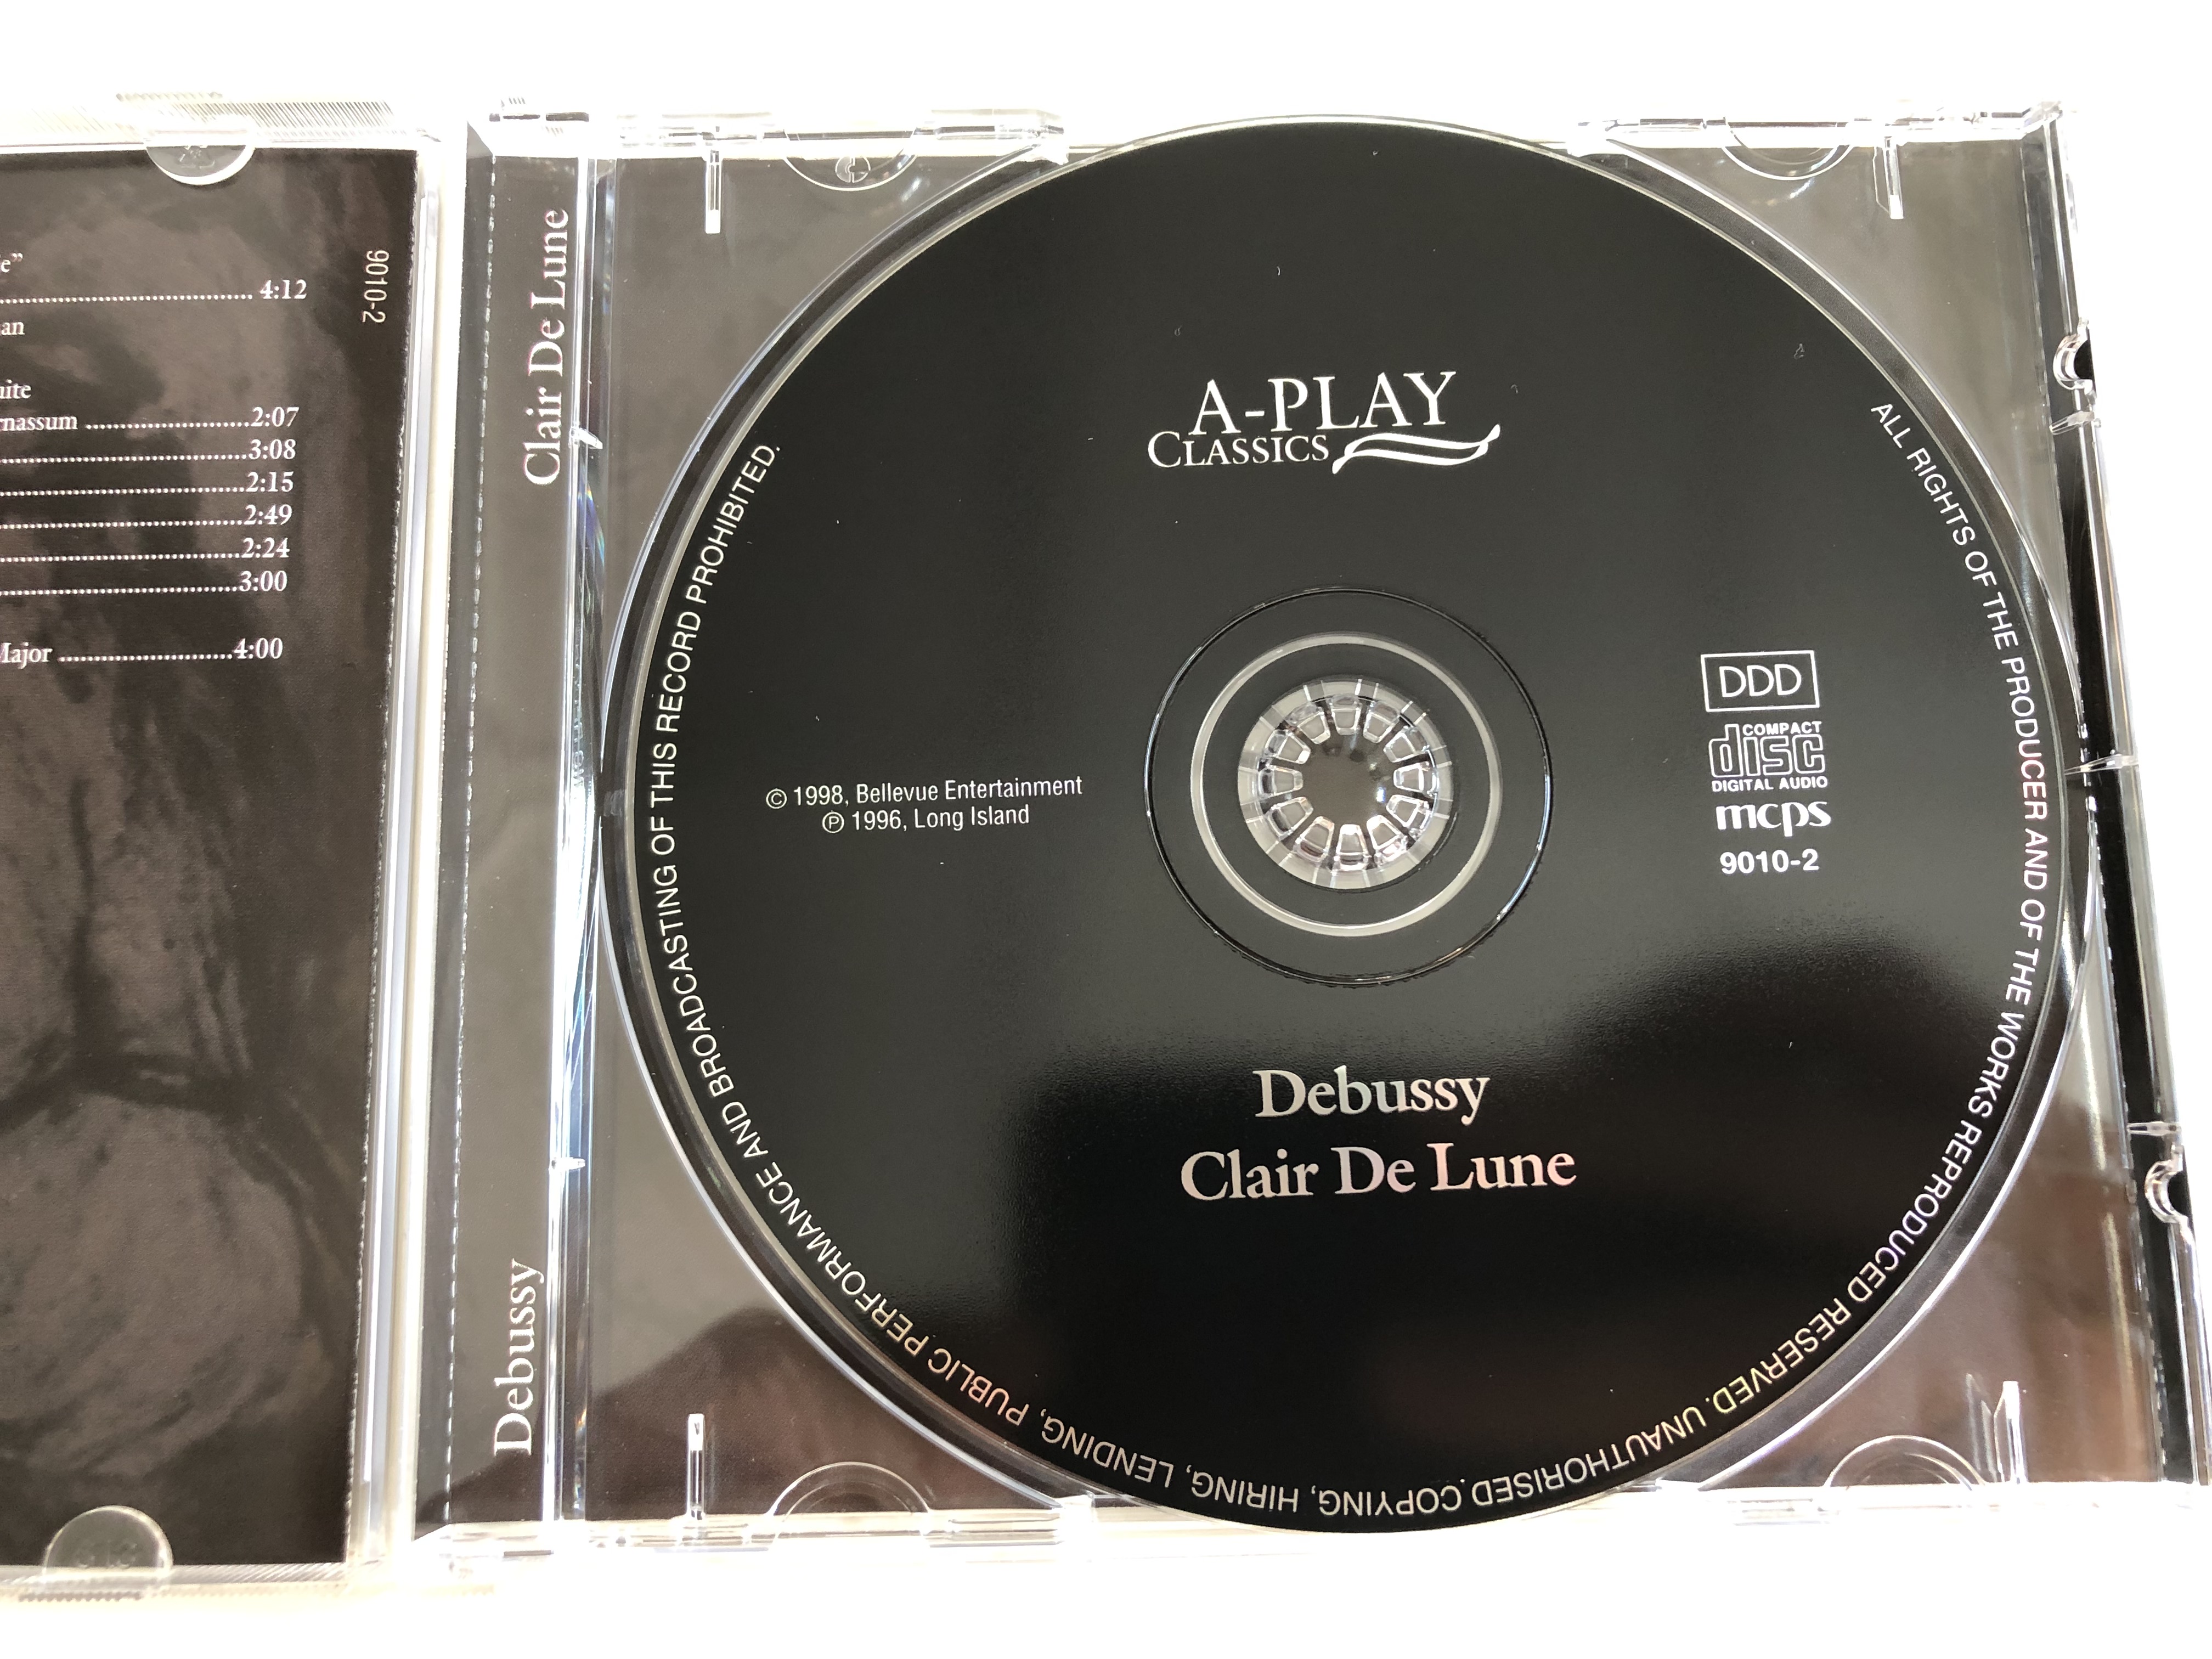 debussy-clair-de-lune-philharmonic-slavonica-conducted-by-alfred-scholz-symphony-orchestra-orf-milan-horvat-dieter-goldman-piano-jurica-maurai-piano-audio-cd-1998-9010-2-4-.jpg